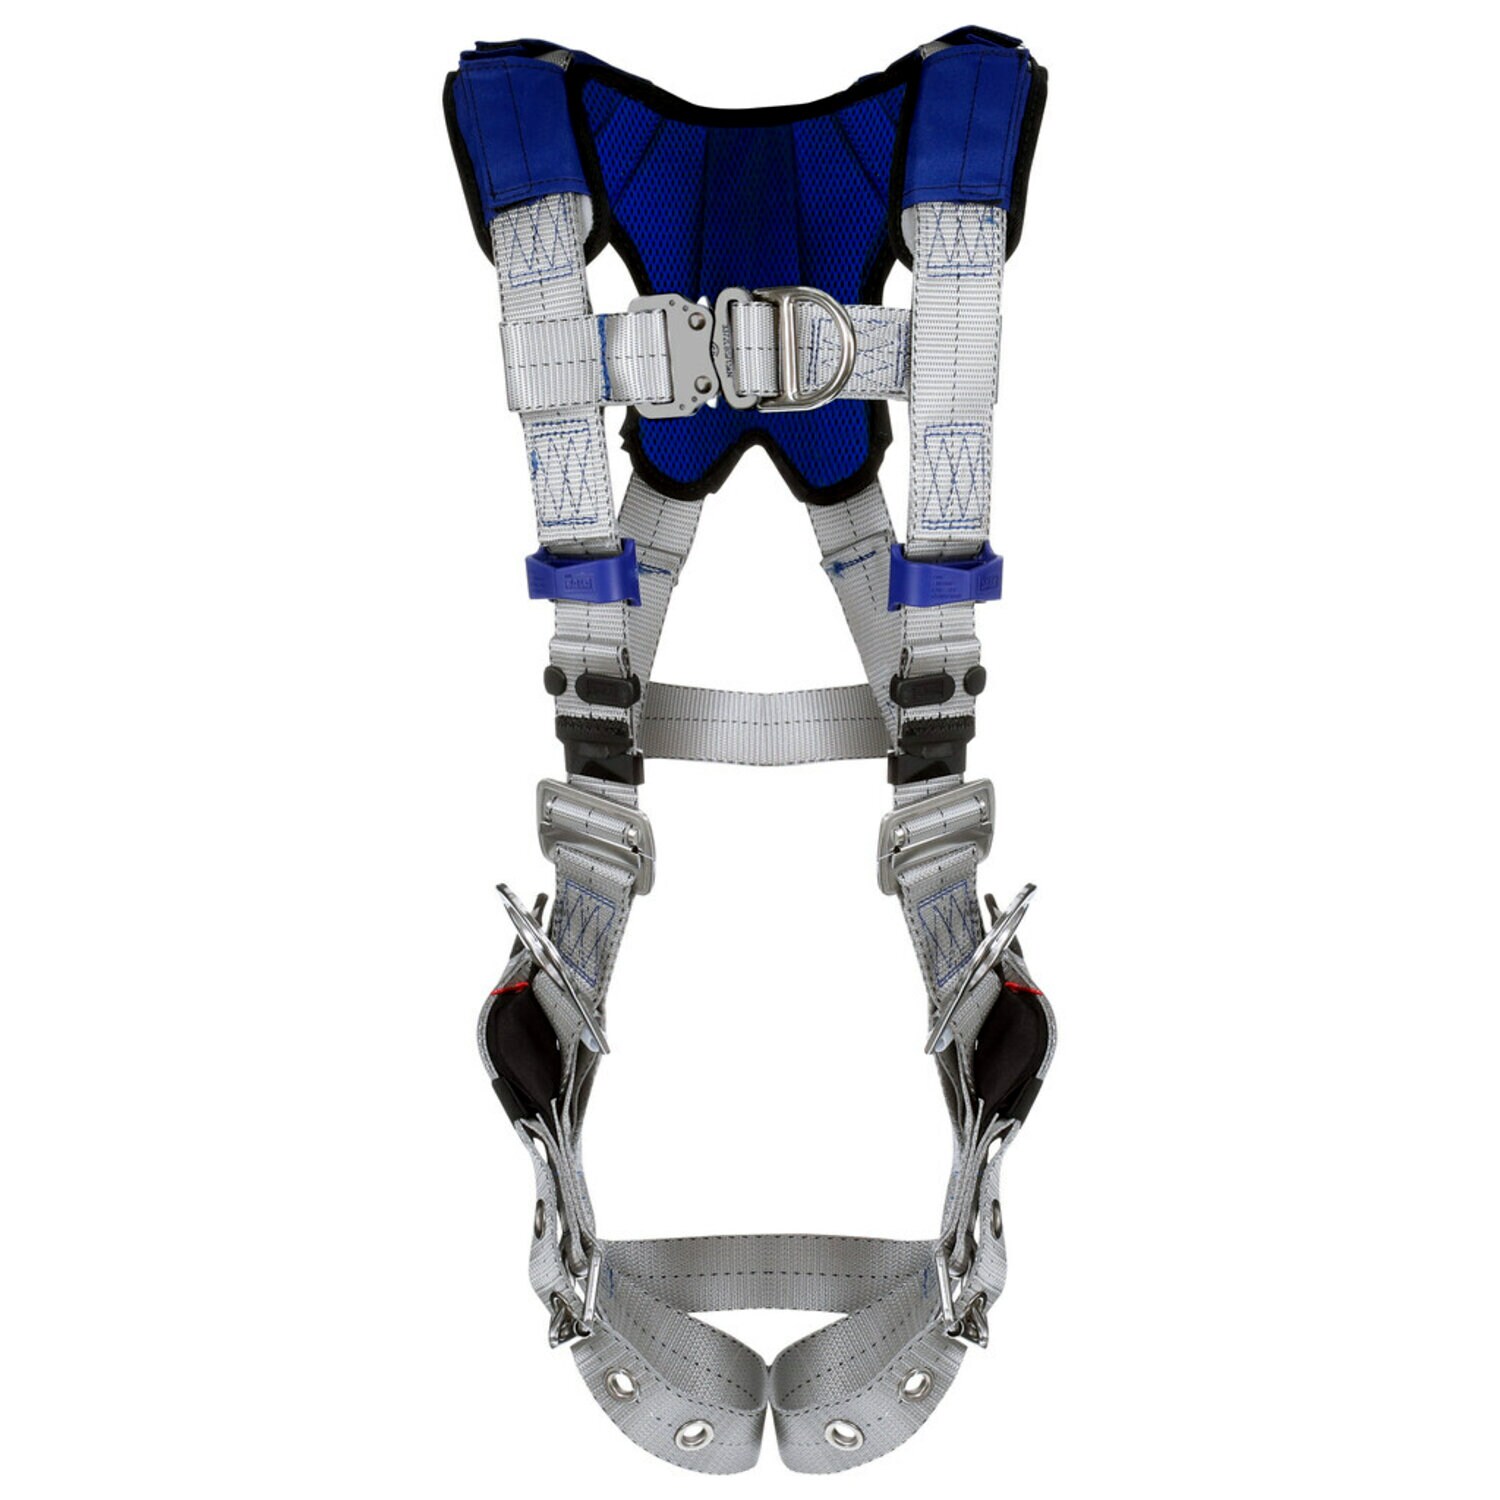 7012817699 - 3M DBI-SALA ExoFit X100 Comfort Climbing/Positioning Safety Harness 1401218, X-Large, Stainless Steel Hardware